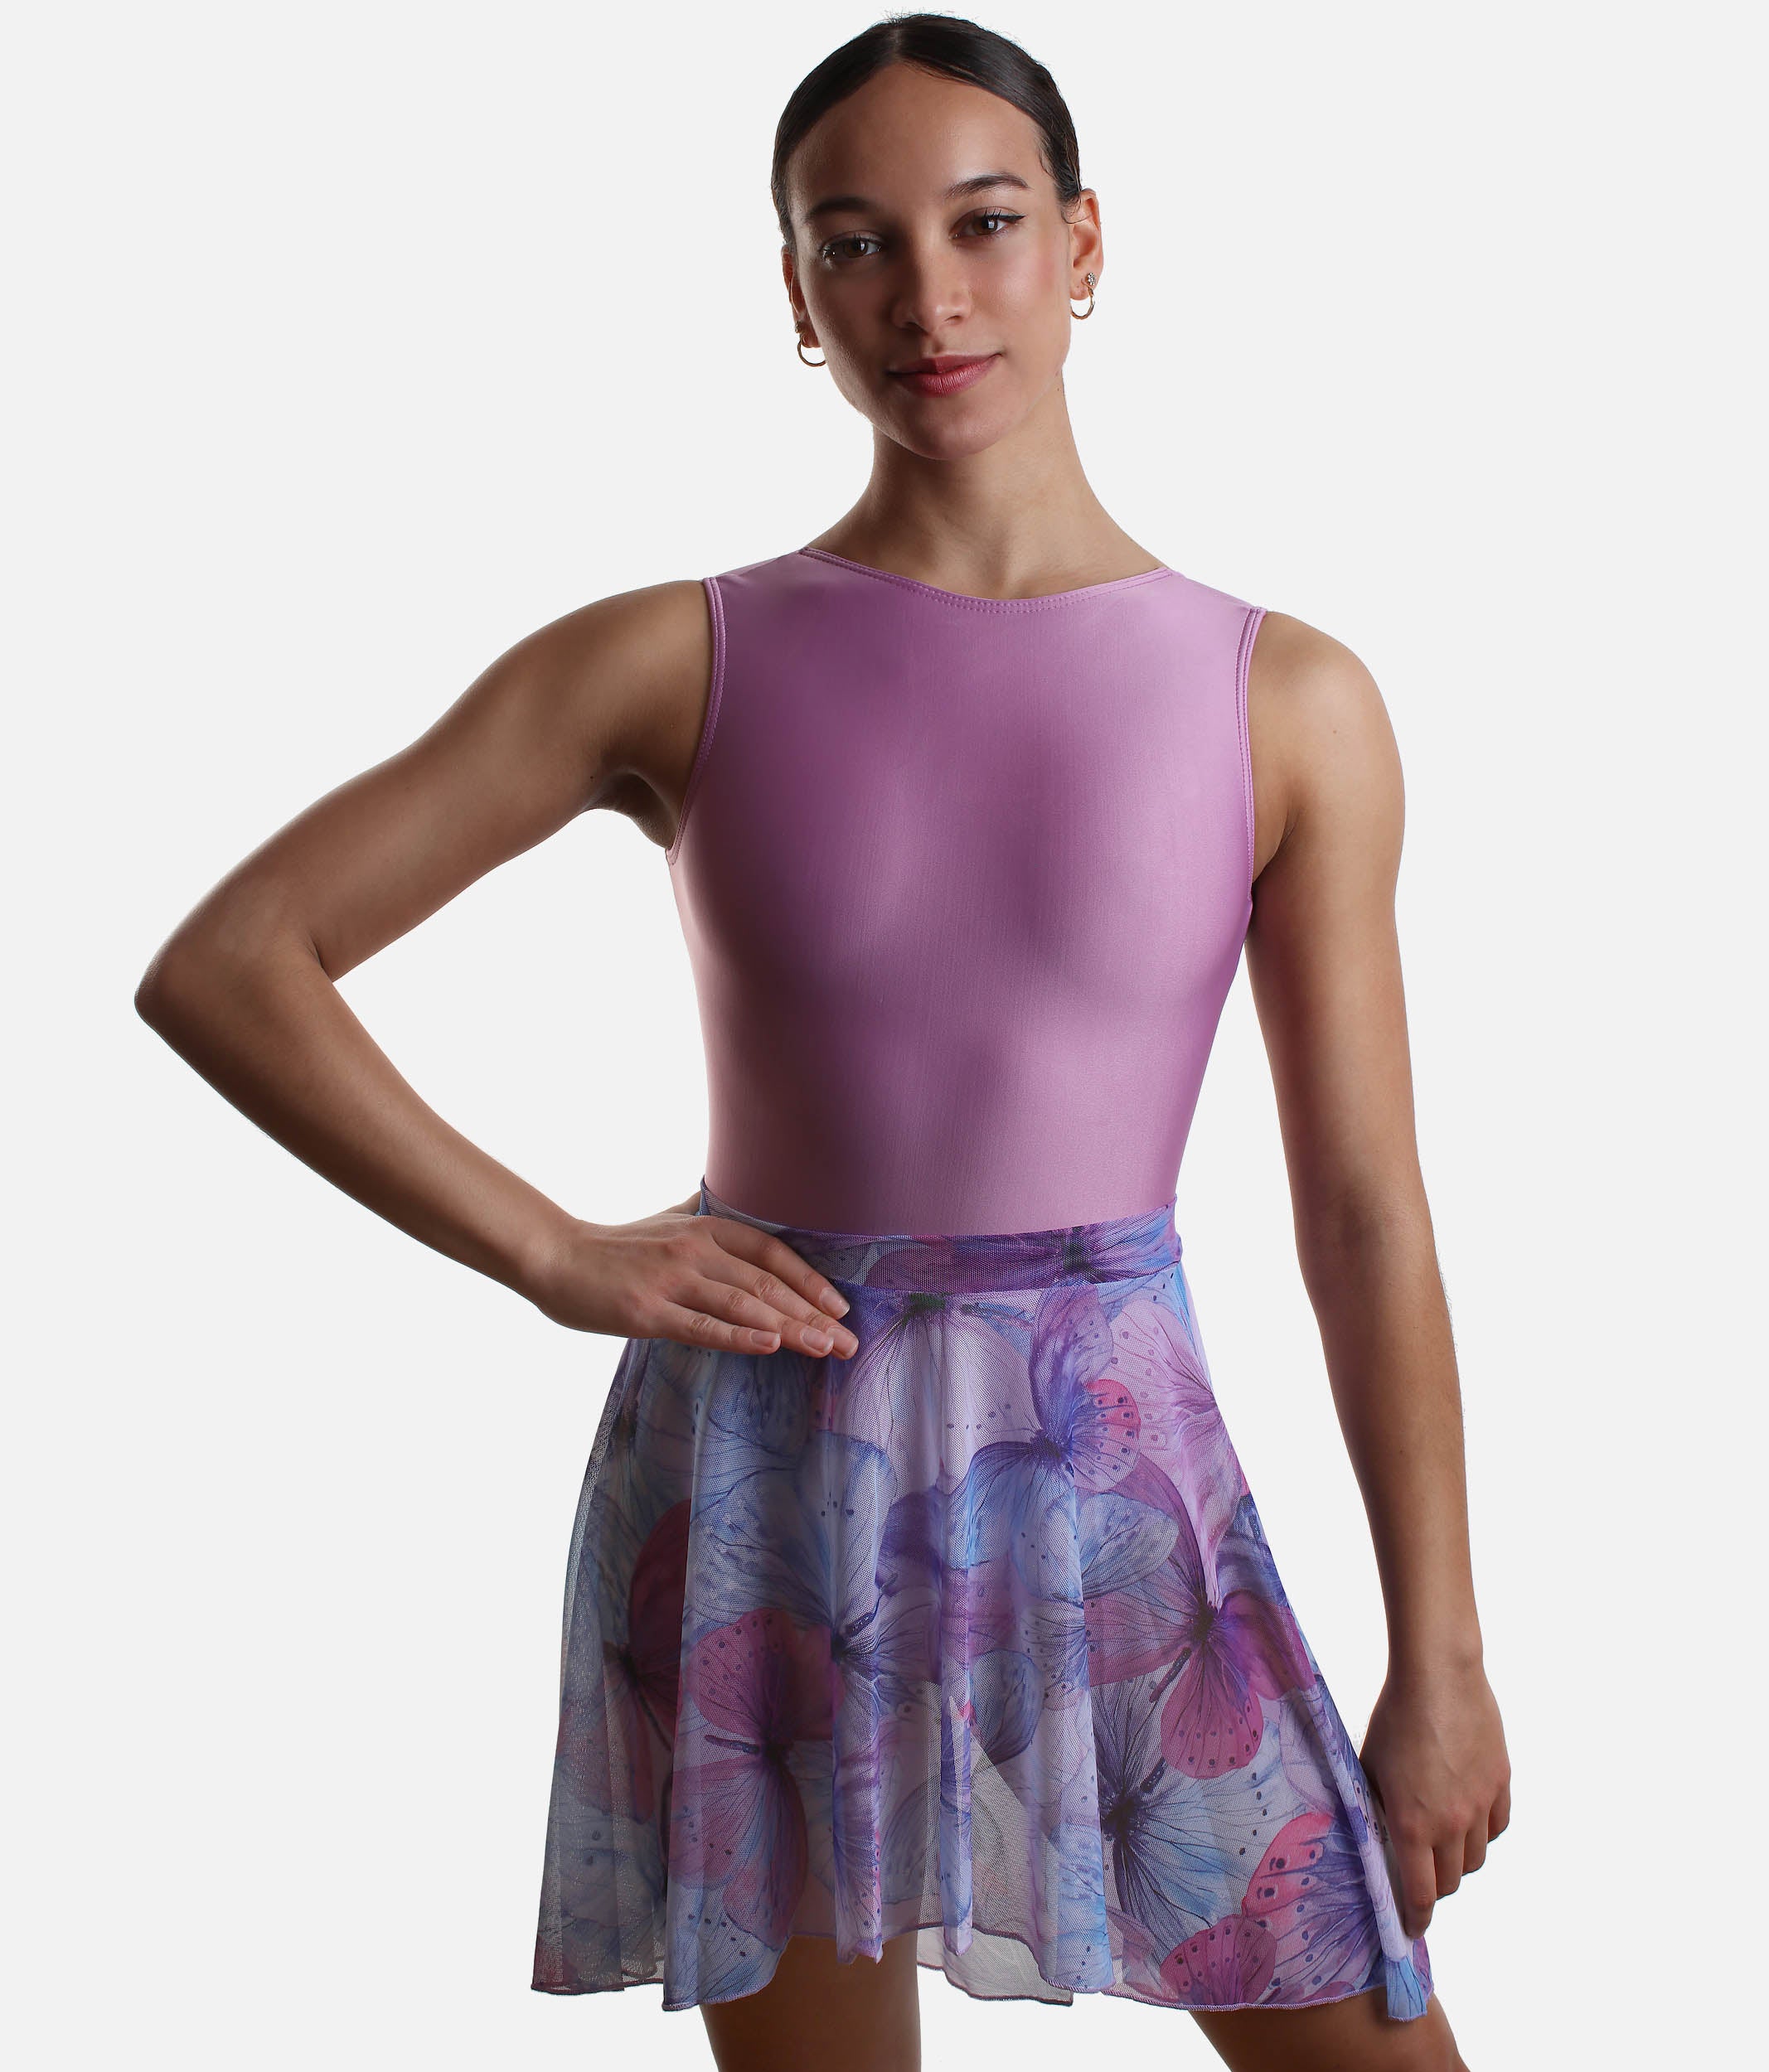 Low-High Pull On Ballet Skirt, Butterfly Print - SD 2164